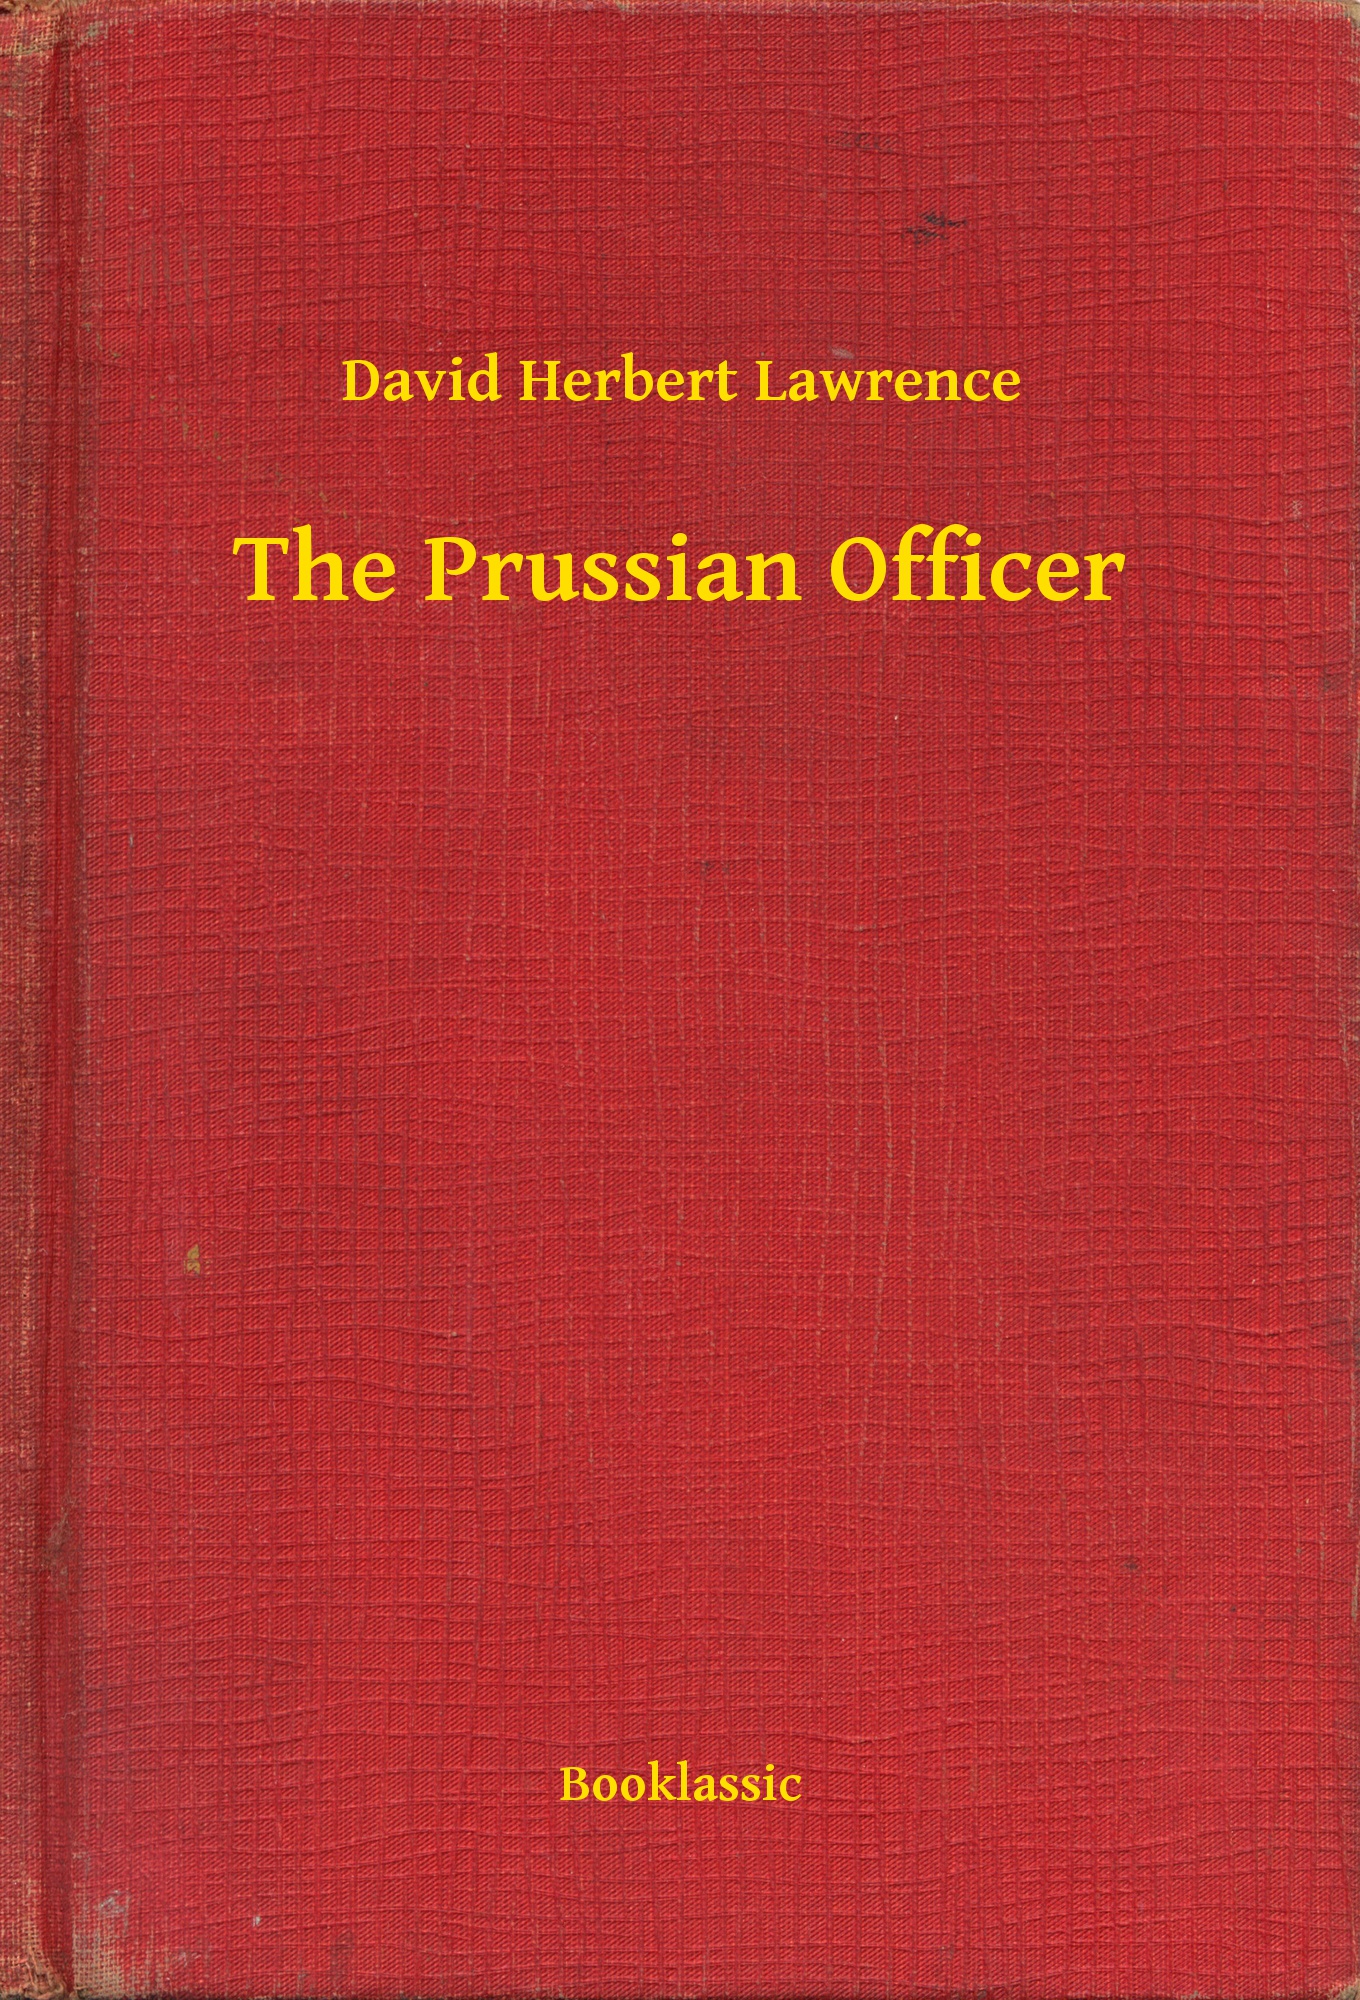 The Prussian Officer